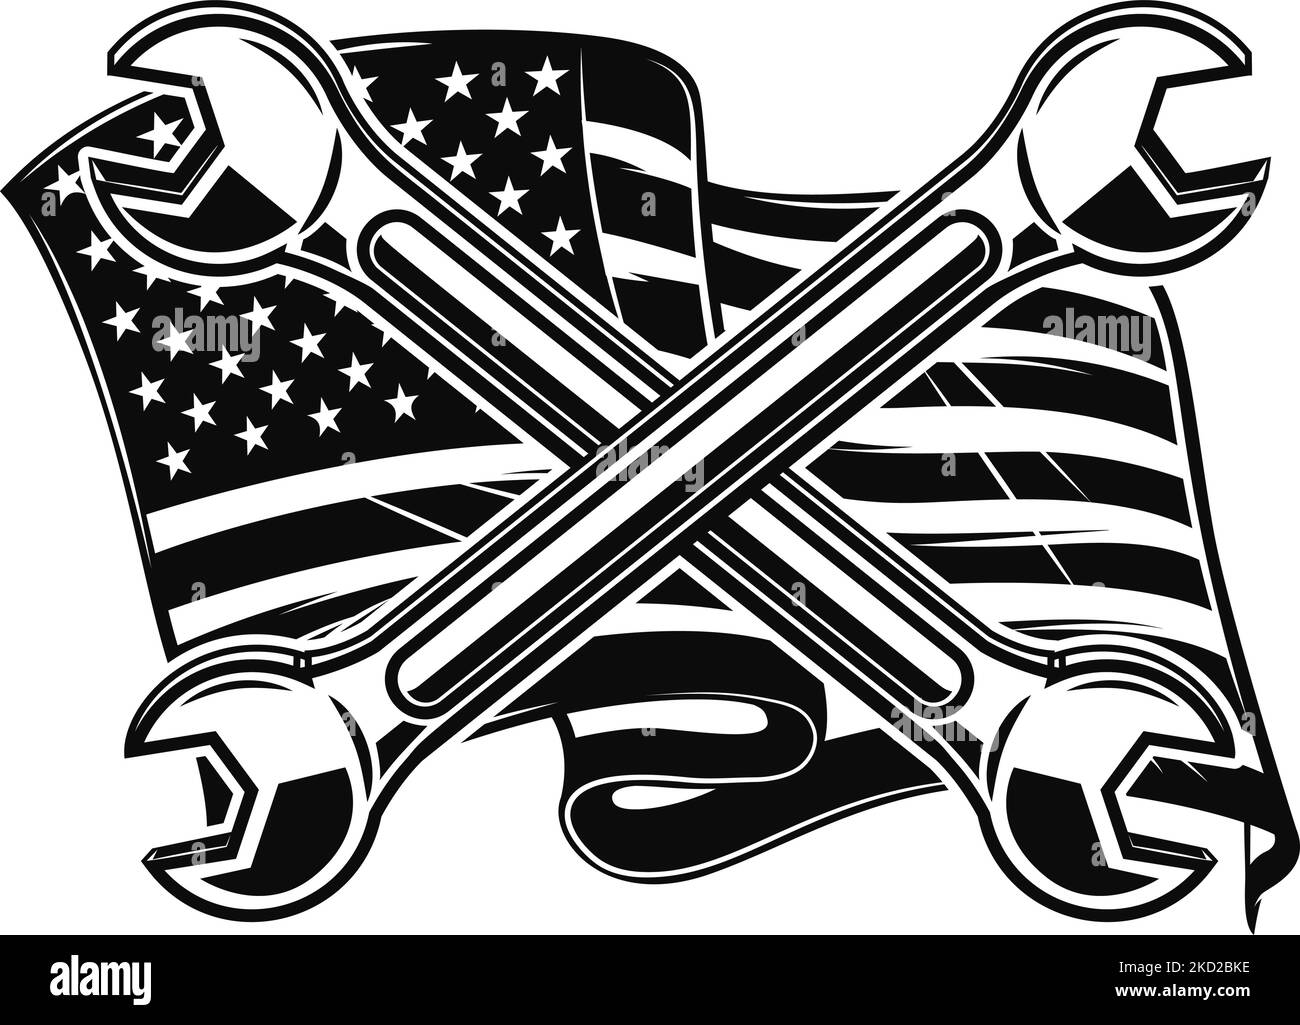 Illustration of crossed pipe wrenches on us flag background. Design element for poster, card, banner, sign. Vector illustration Stock Vector